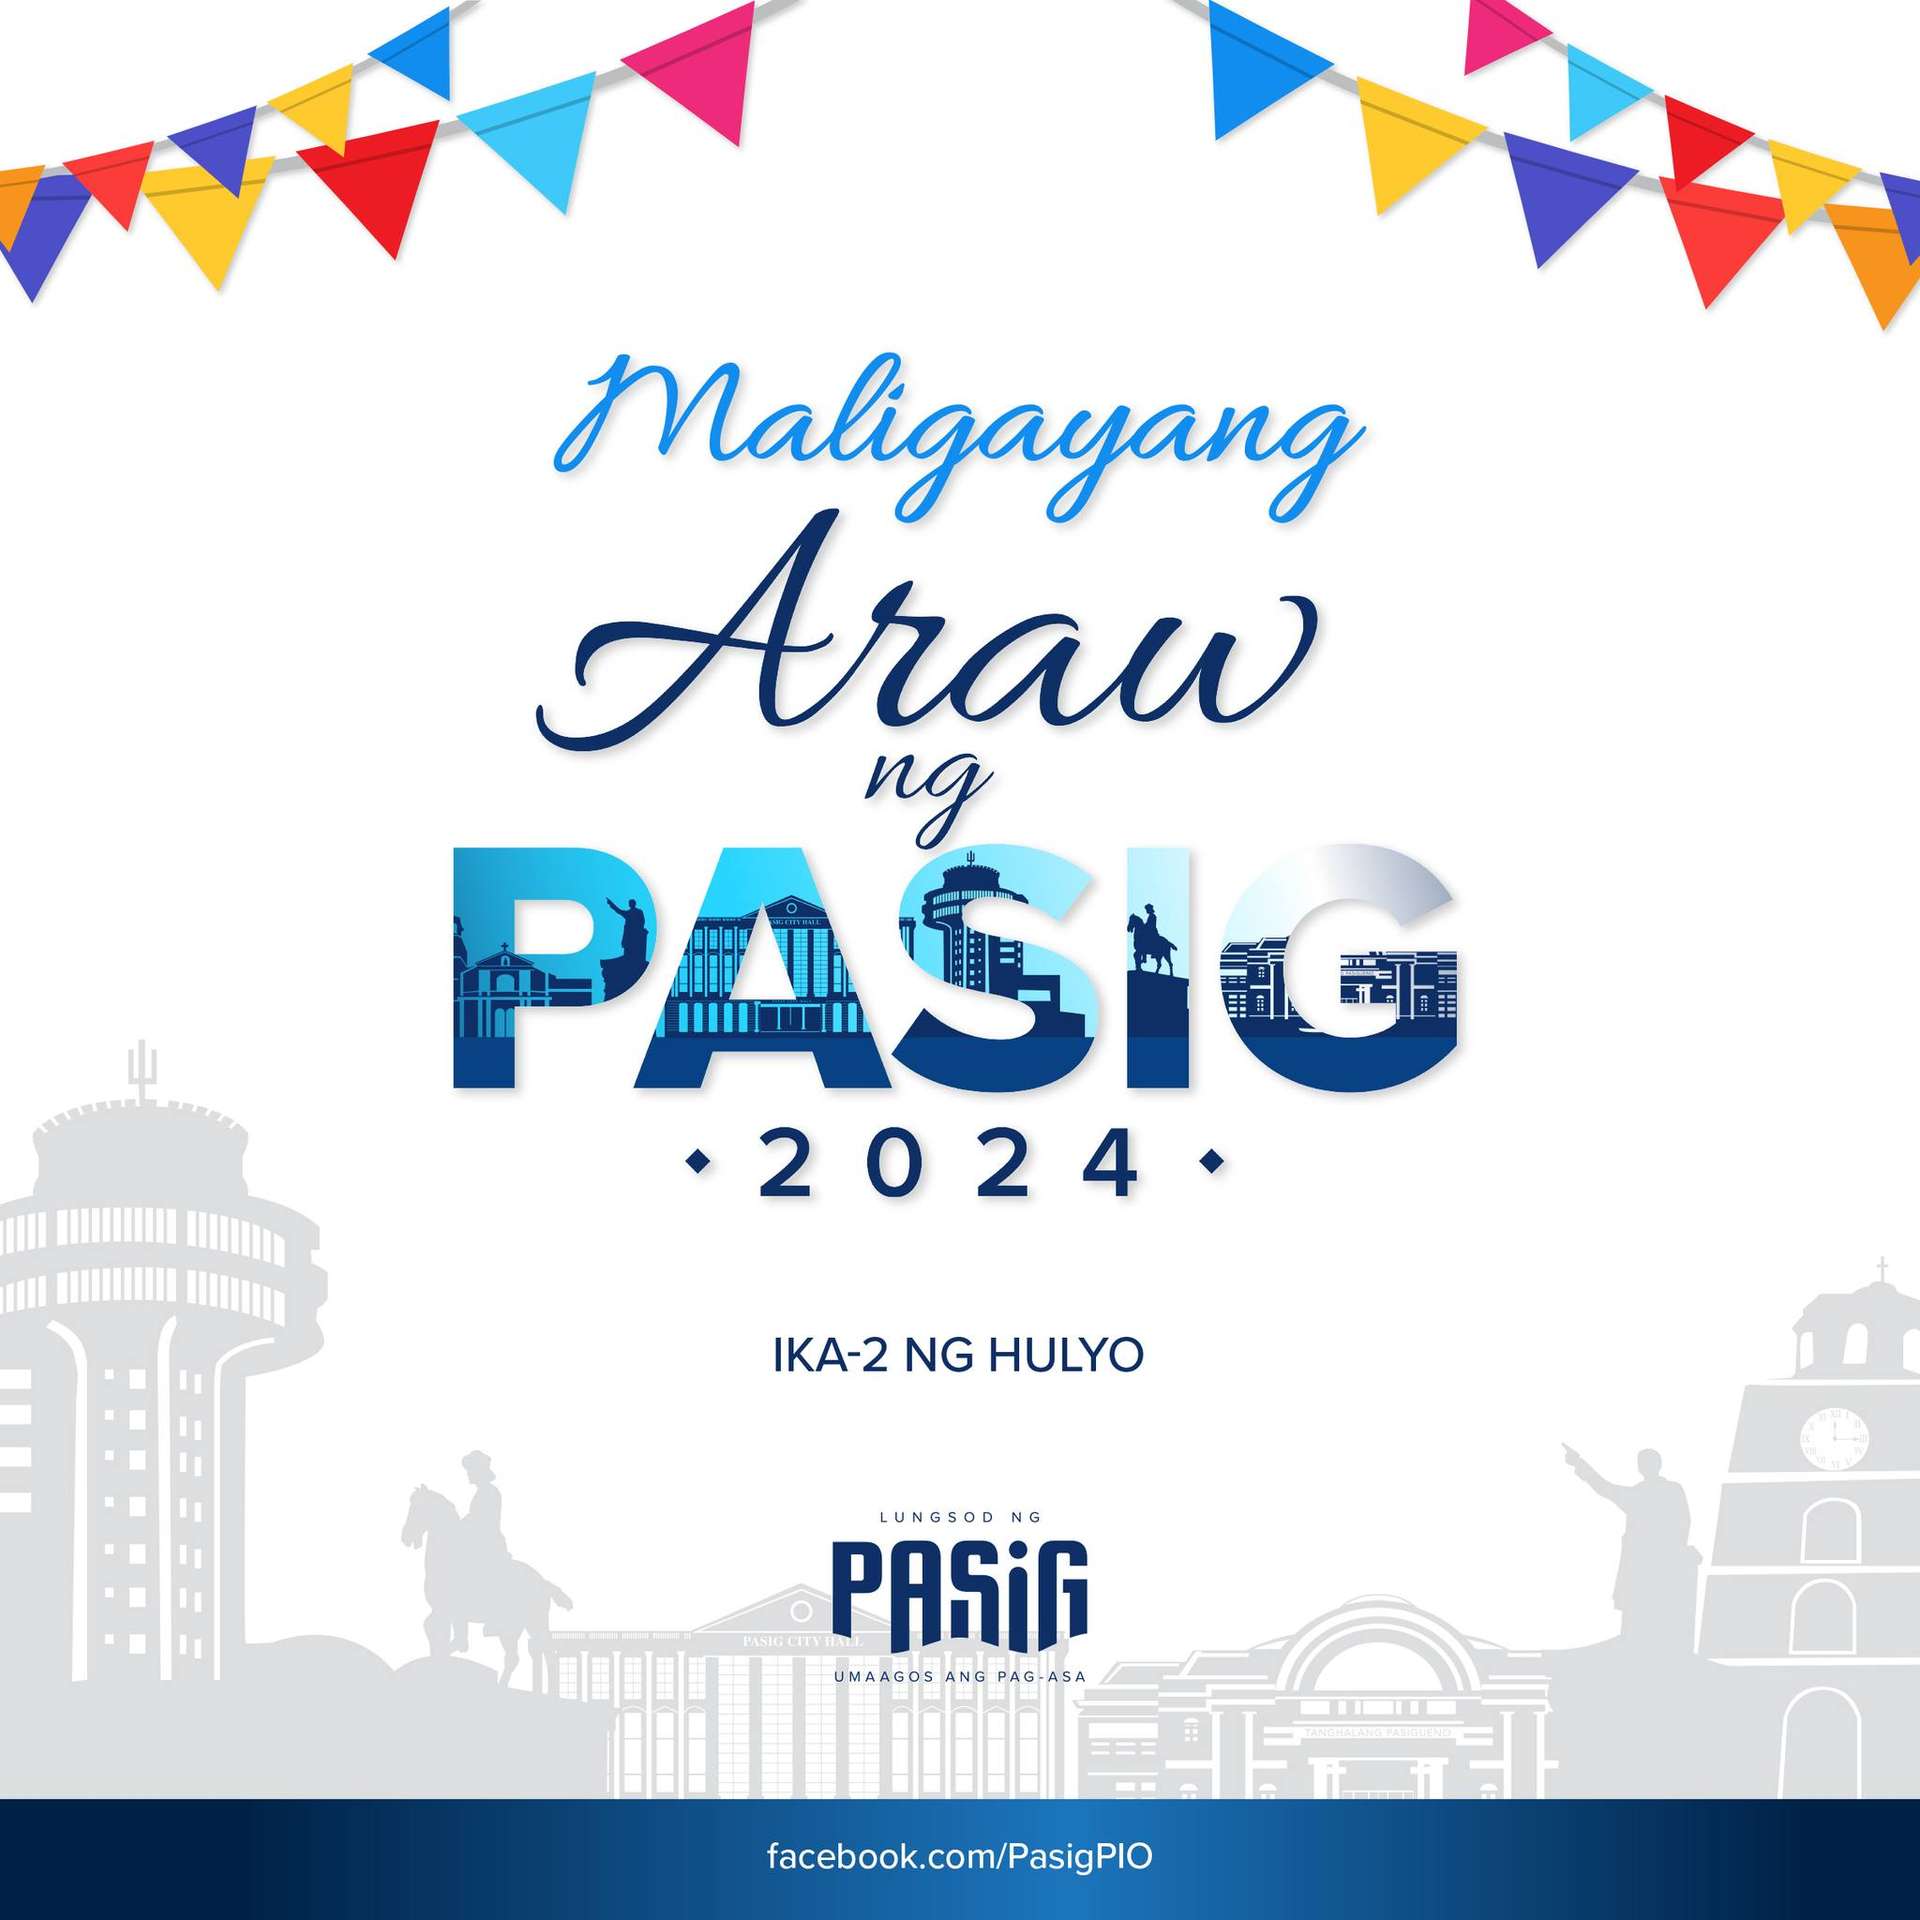 Palace declares non-working day for Pasig City on Tuesday, July 2